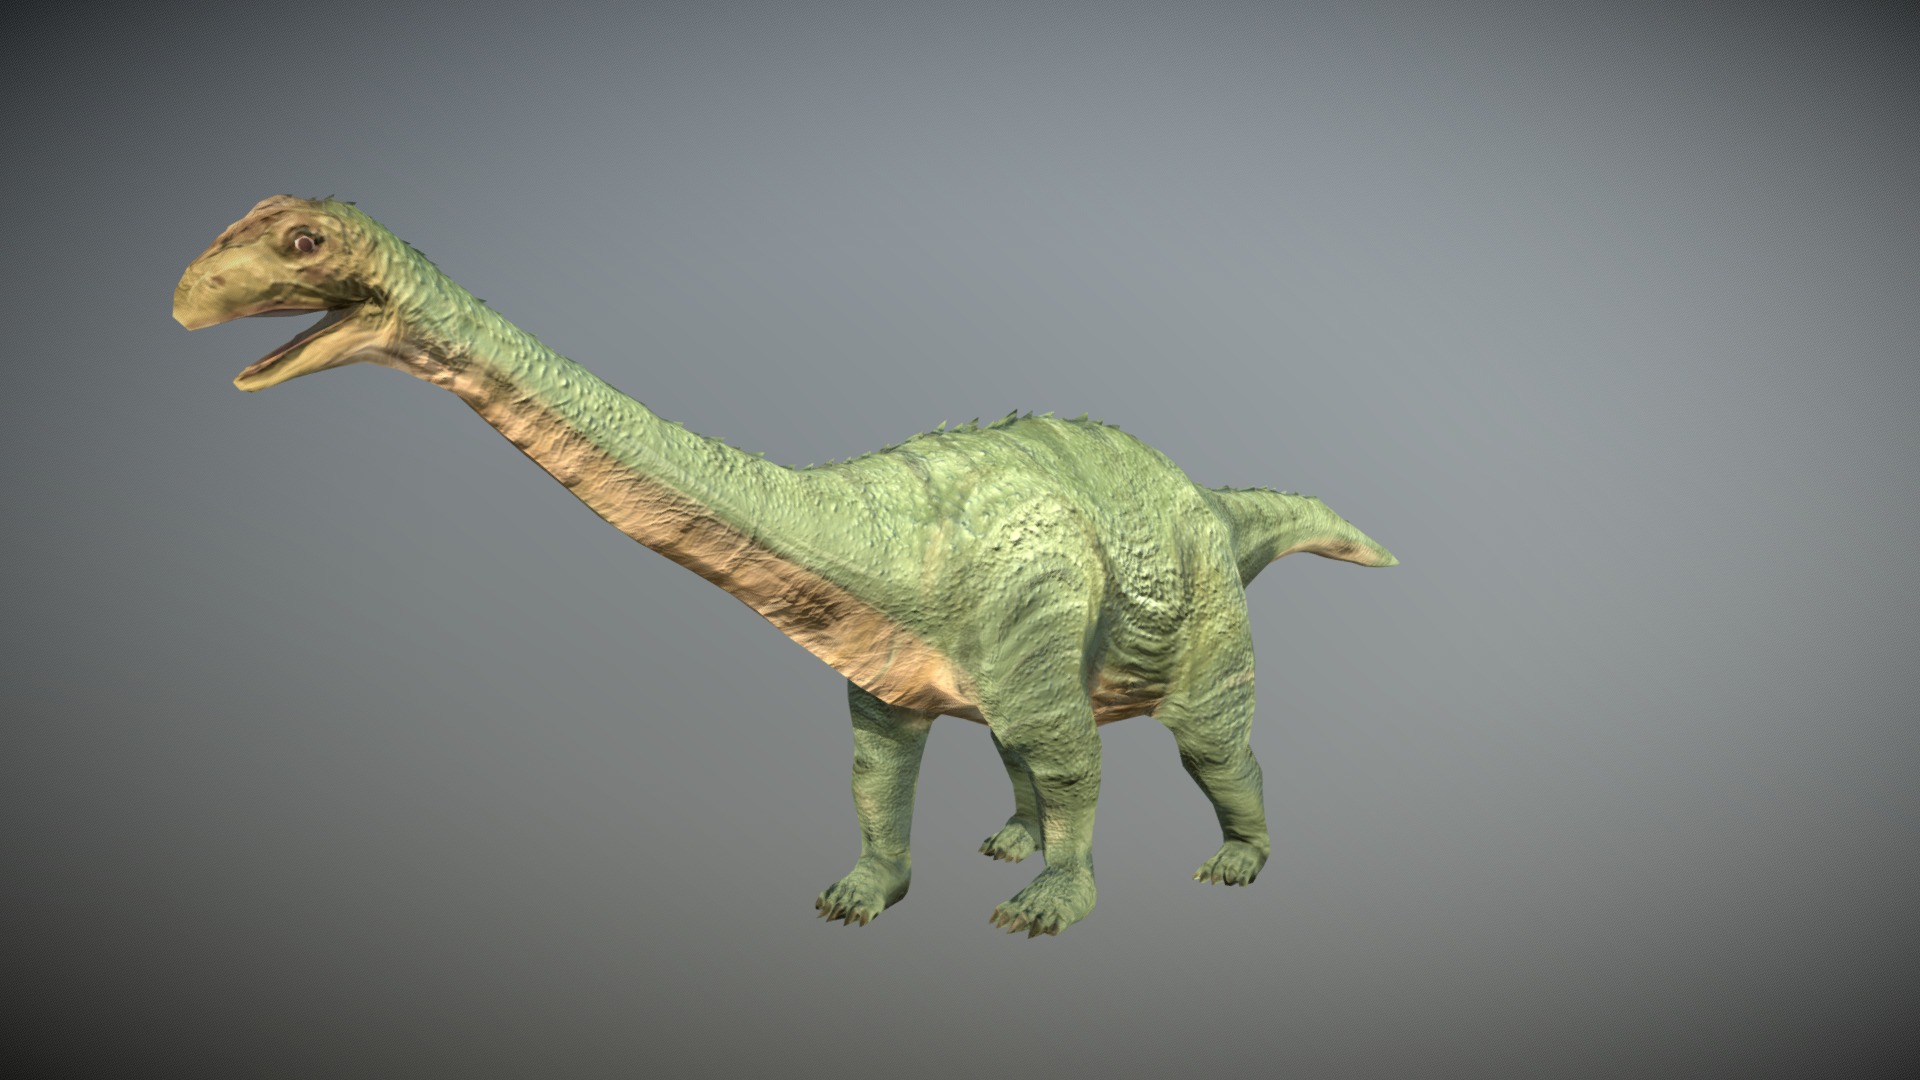 3D model Thai Dinosaur isanosaurus - This is a 3D model of the Thai Dinosaur isanosaurus. The 3D model is about a dinosaur with a long neck.